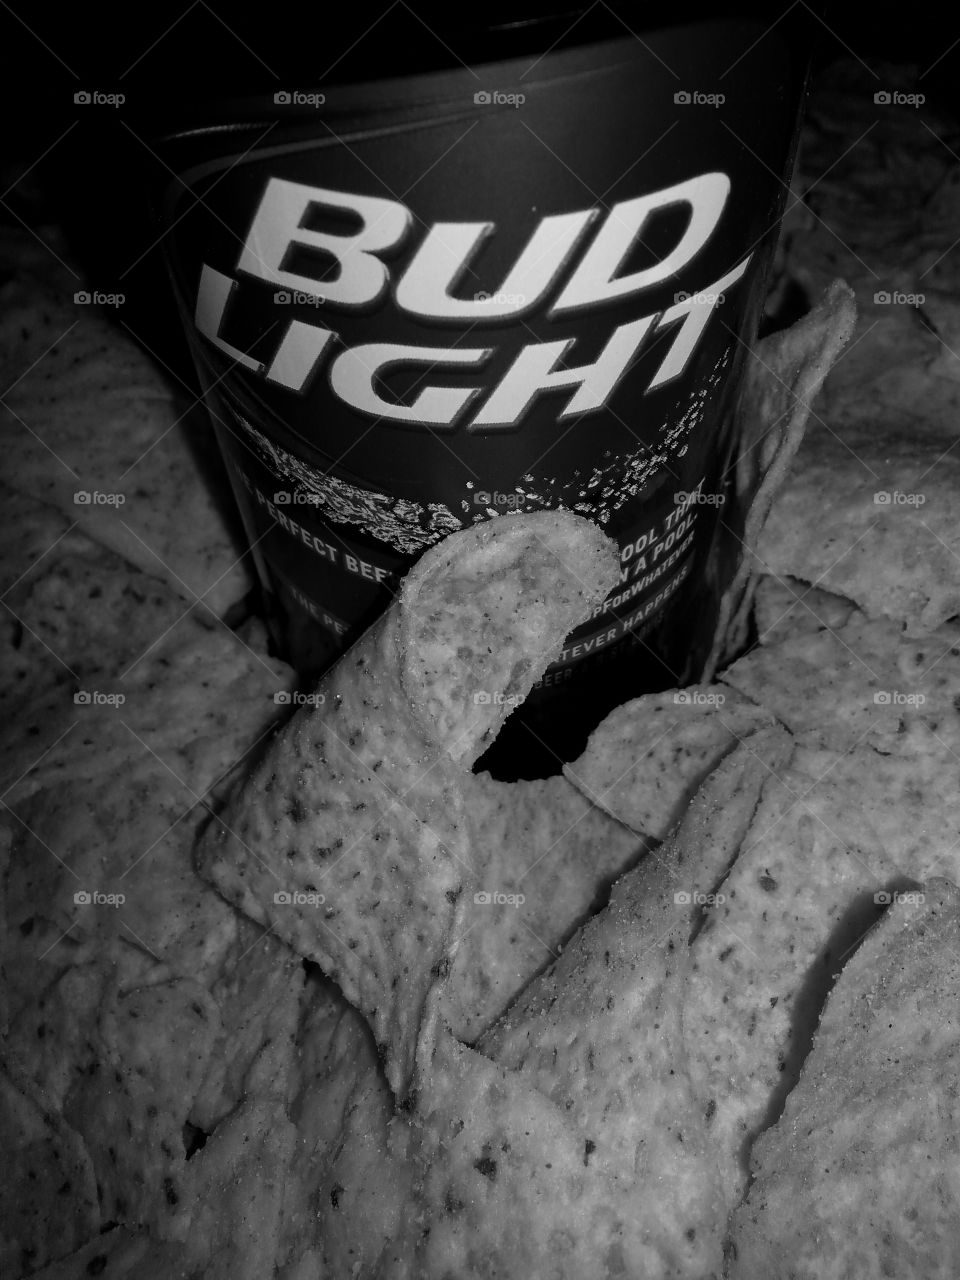 beer and chips. Doritos and Bud Light